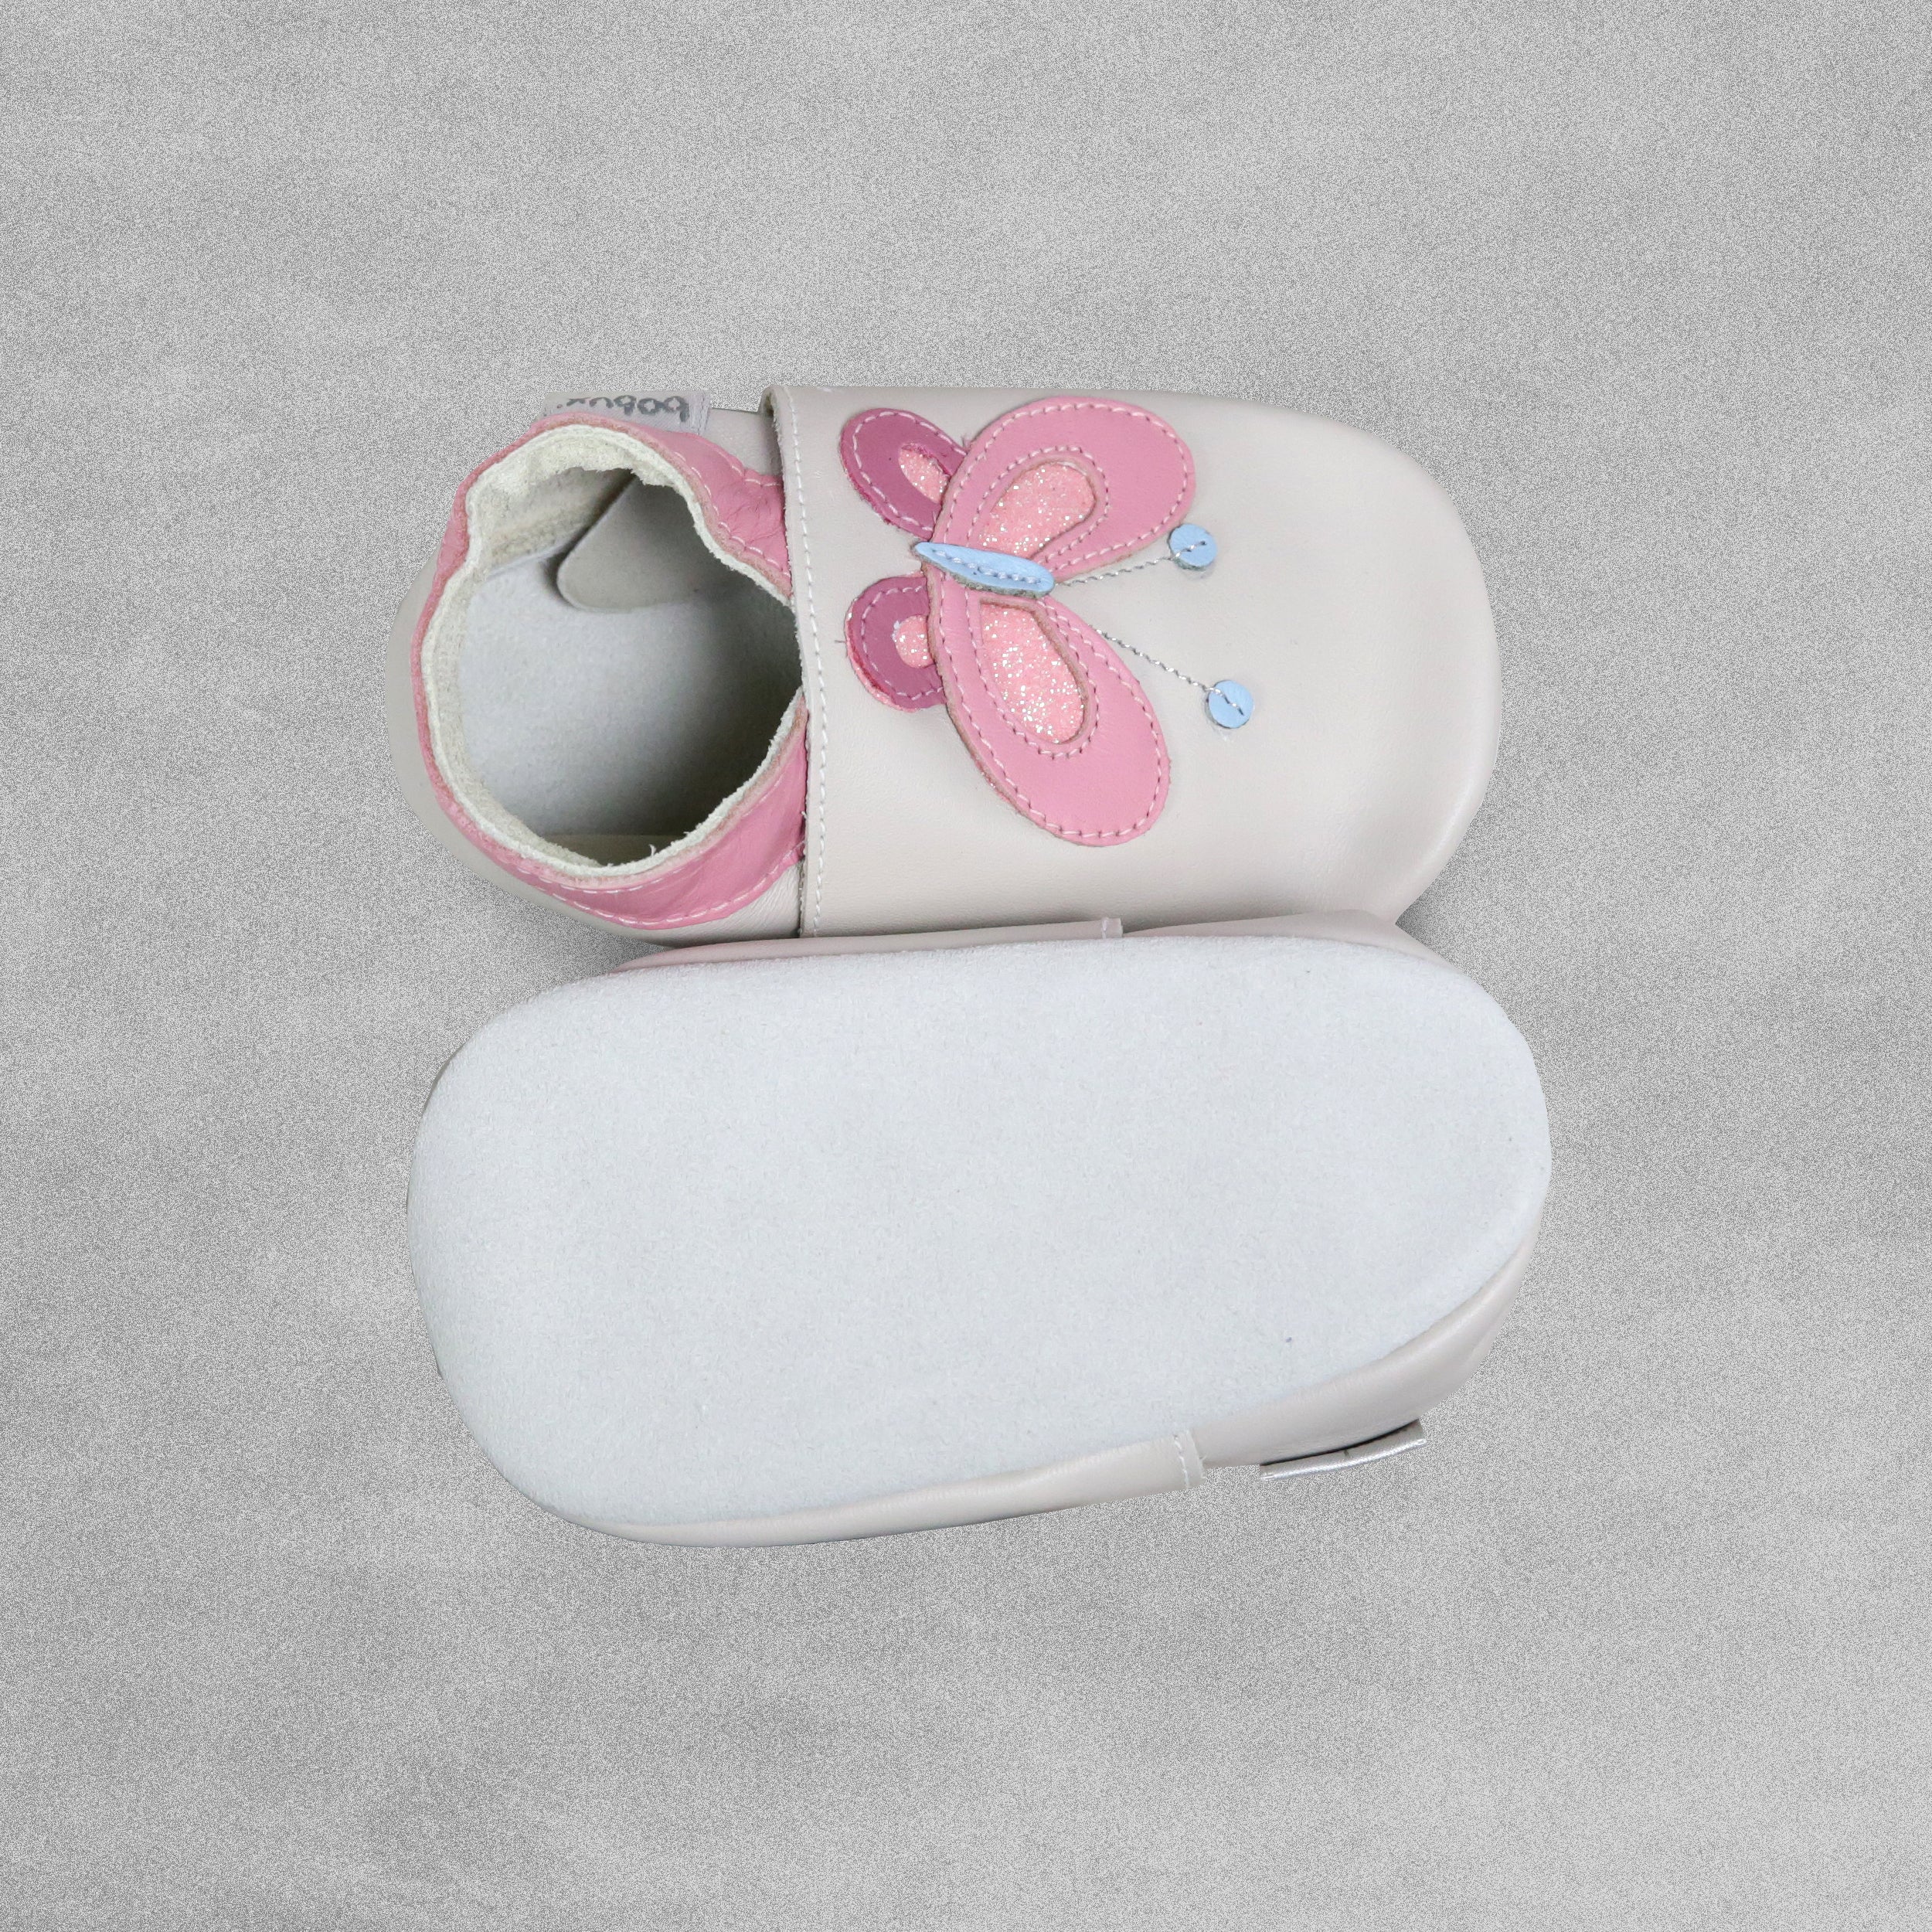 Bobux Soft Sole Baby Shoe 'Milk Butterfly' - Large /15-21 Months